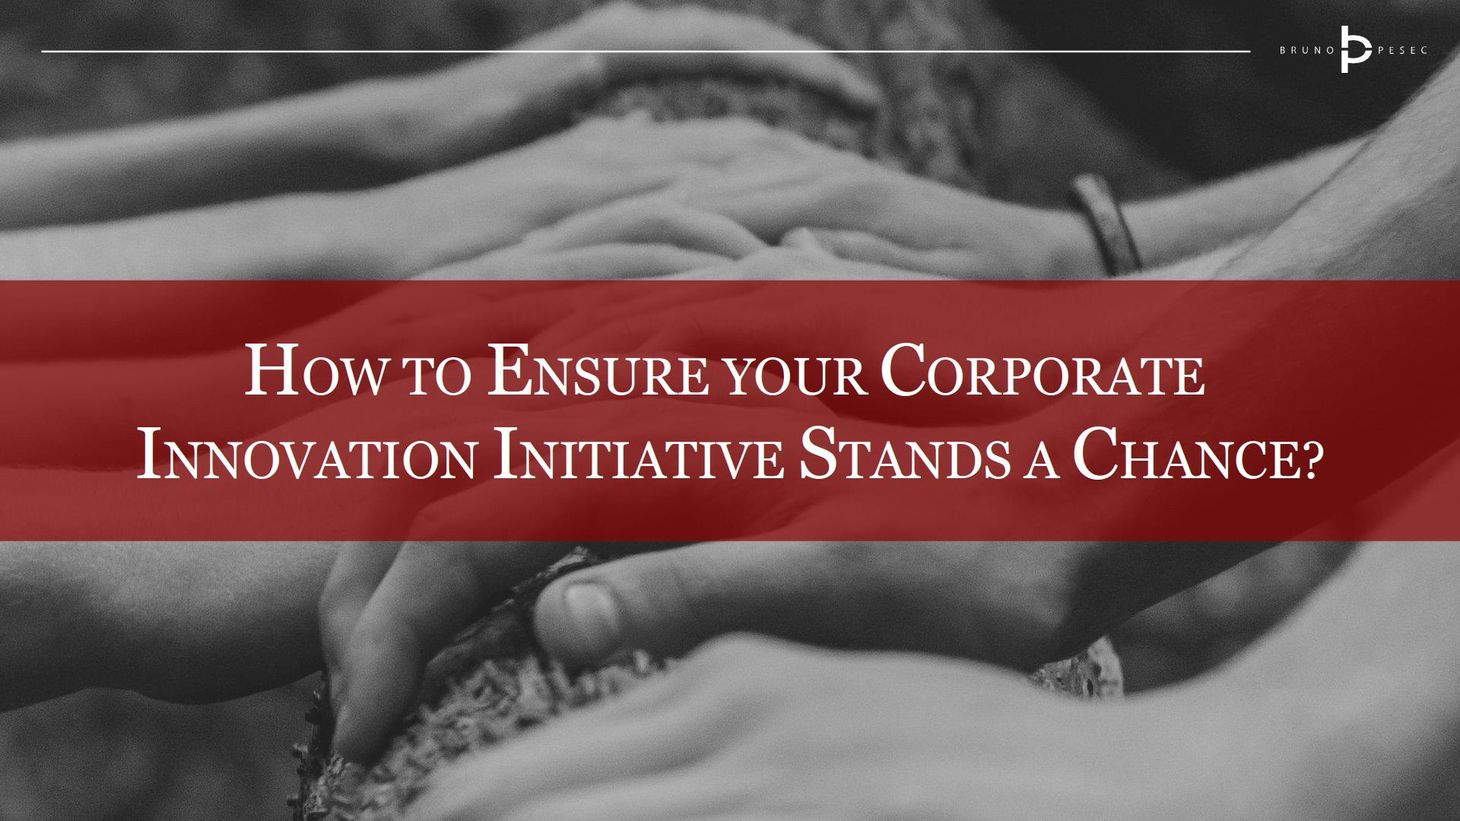 How to ensure your corporate innovation initiative stands a chance